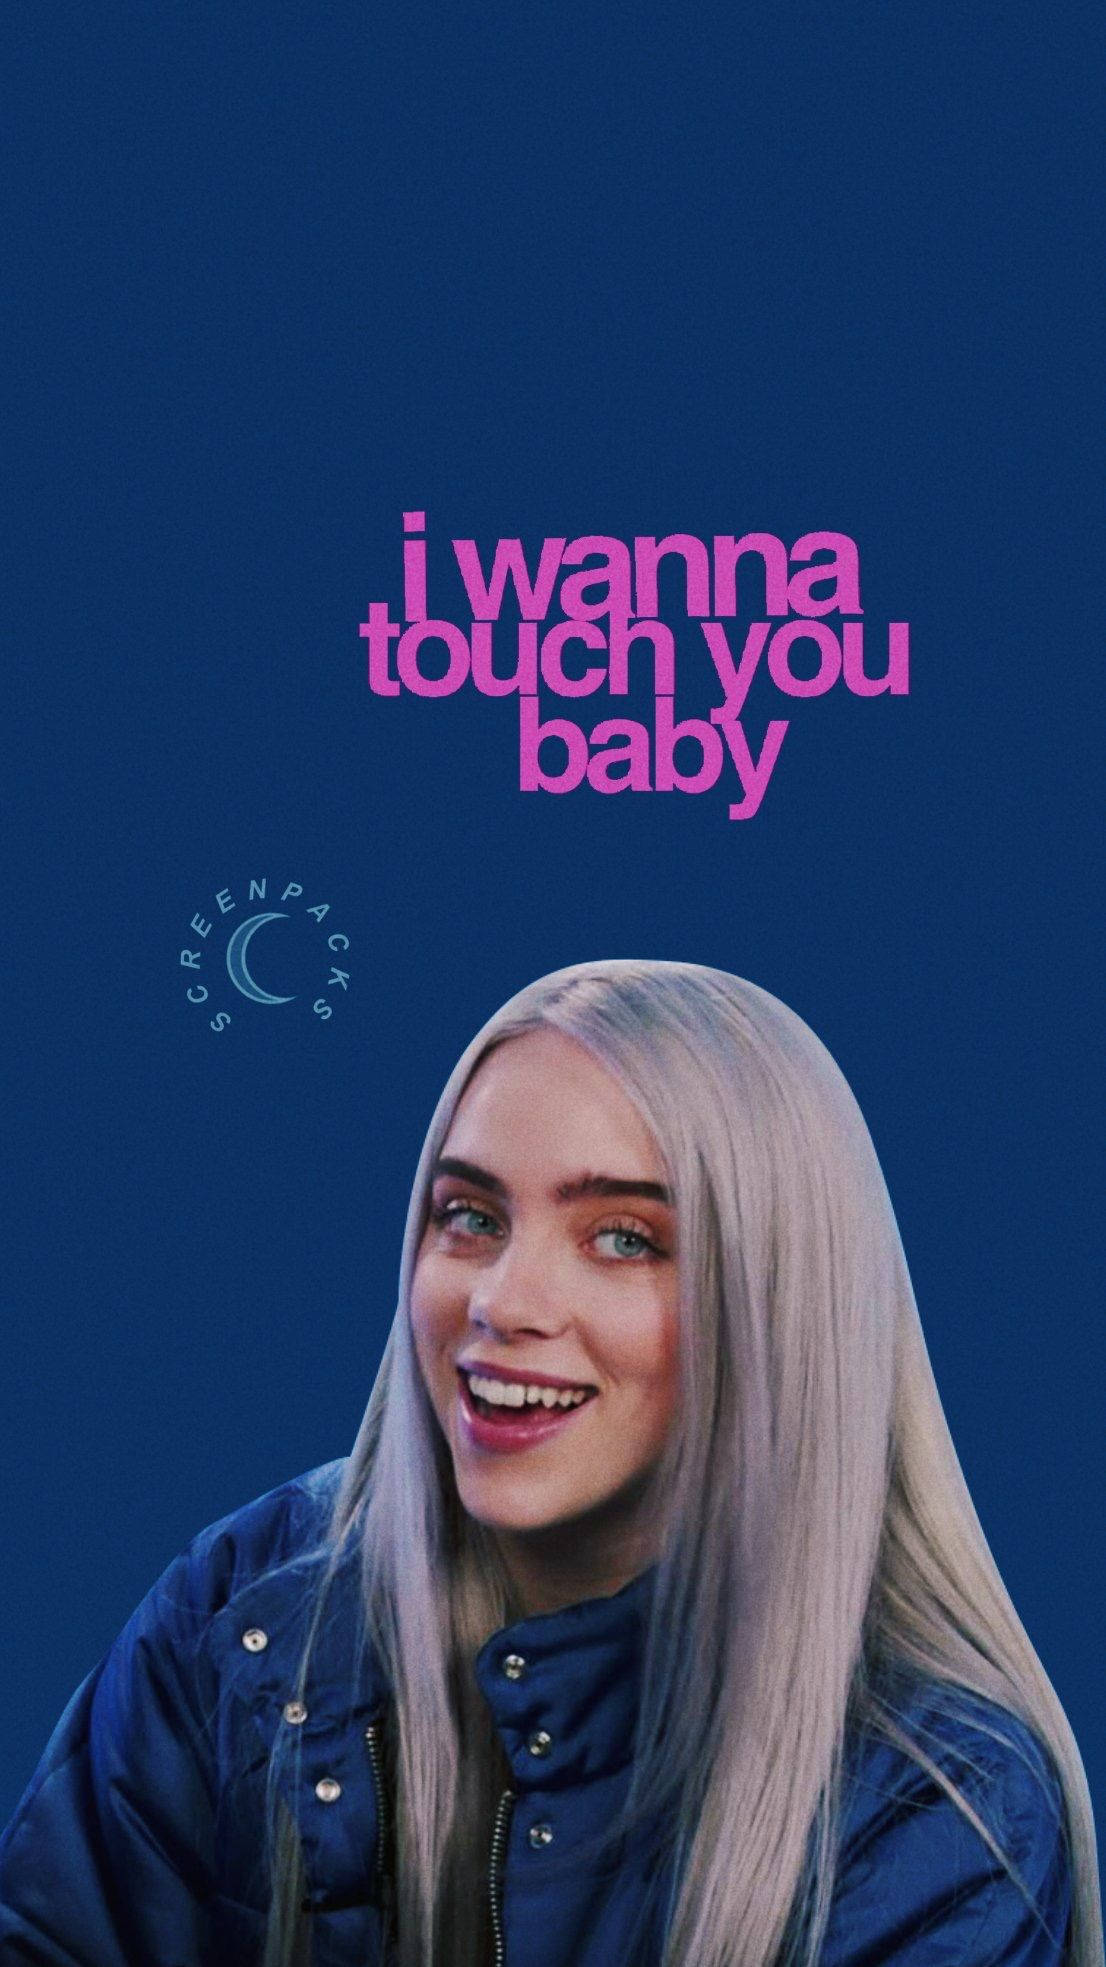 Aesthetic Billie Eilish I Wanna Touch You Baby Wallpaper